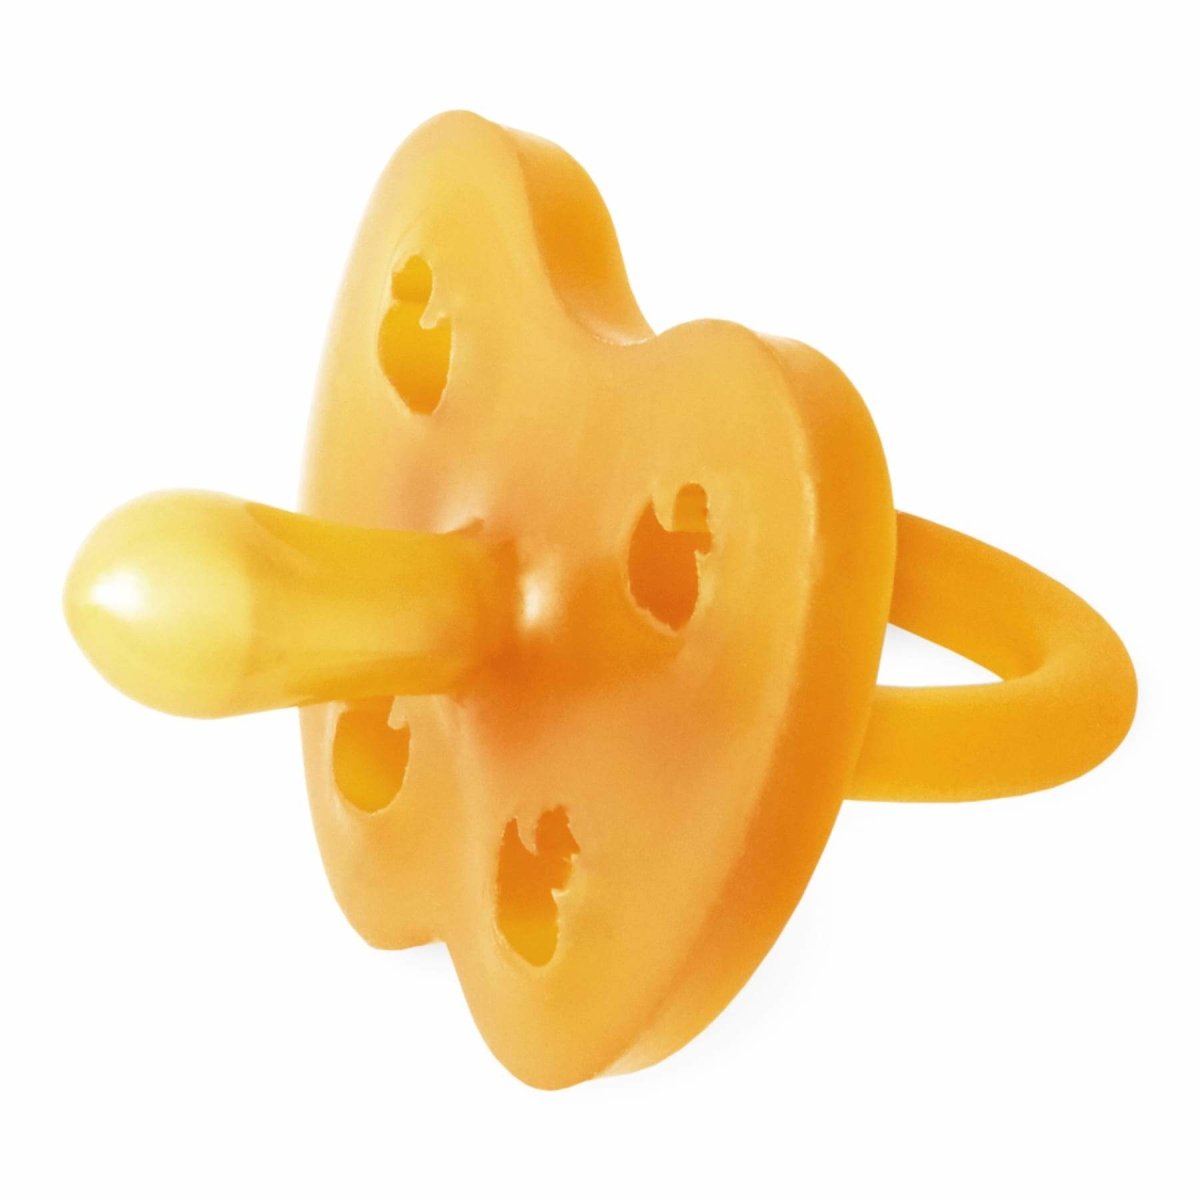 Natural Rubber Pacifier - Classic | Hevea | Baby Essentials - Bee Like Kids